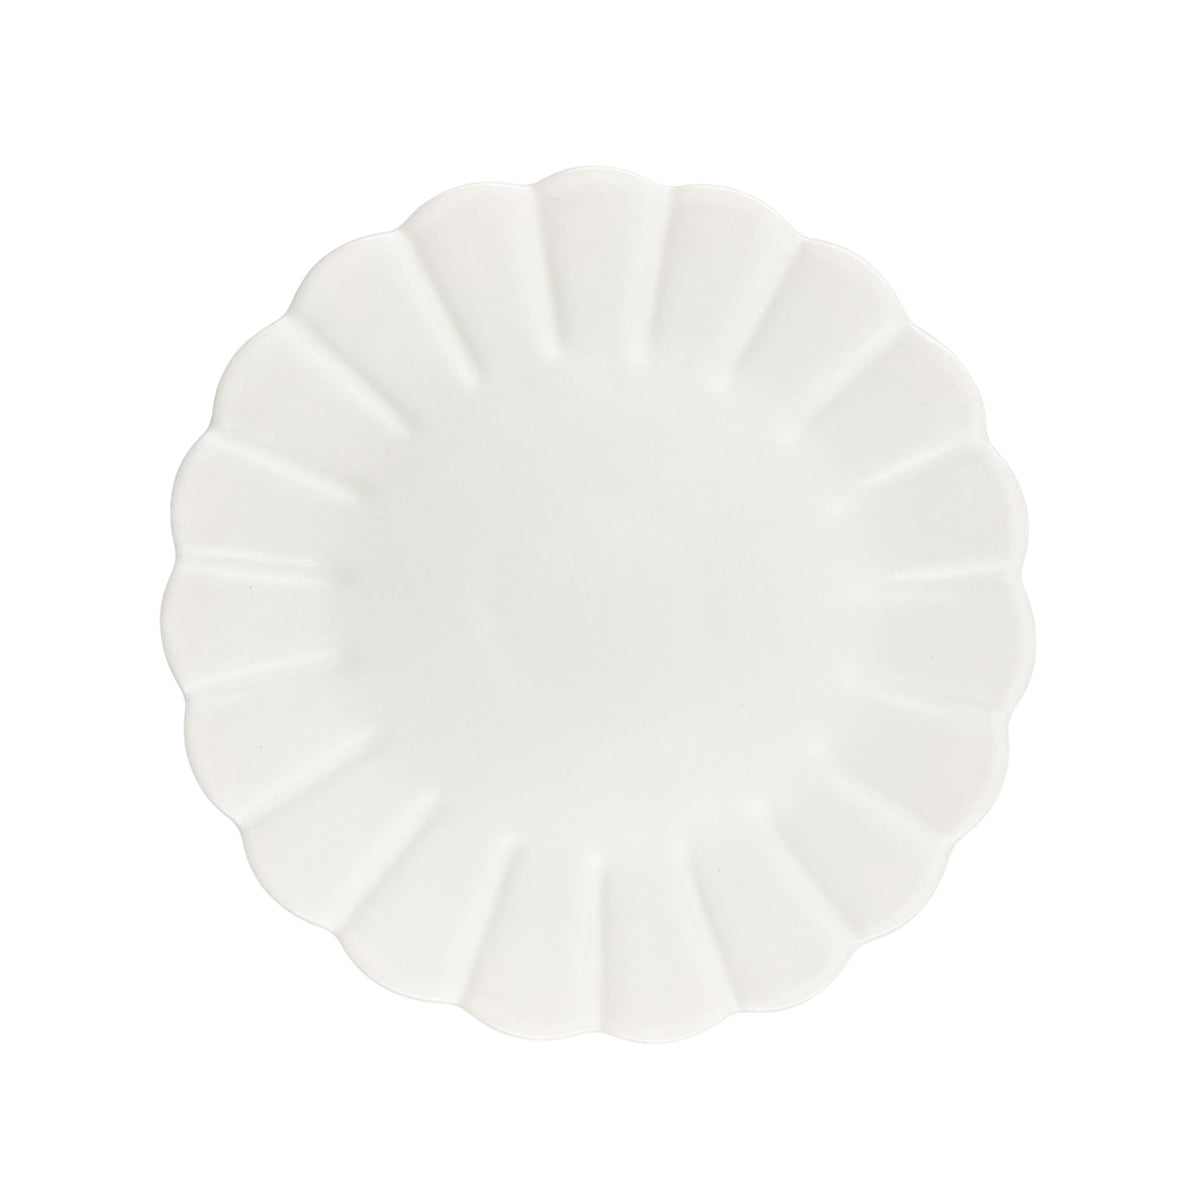 Lafayette Dinner Plate in Pearl White- Set of 4